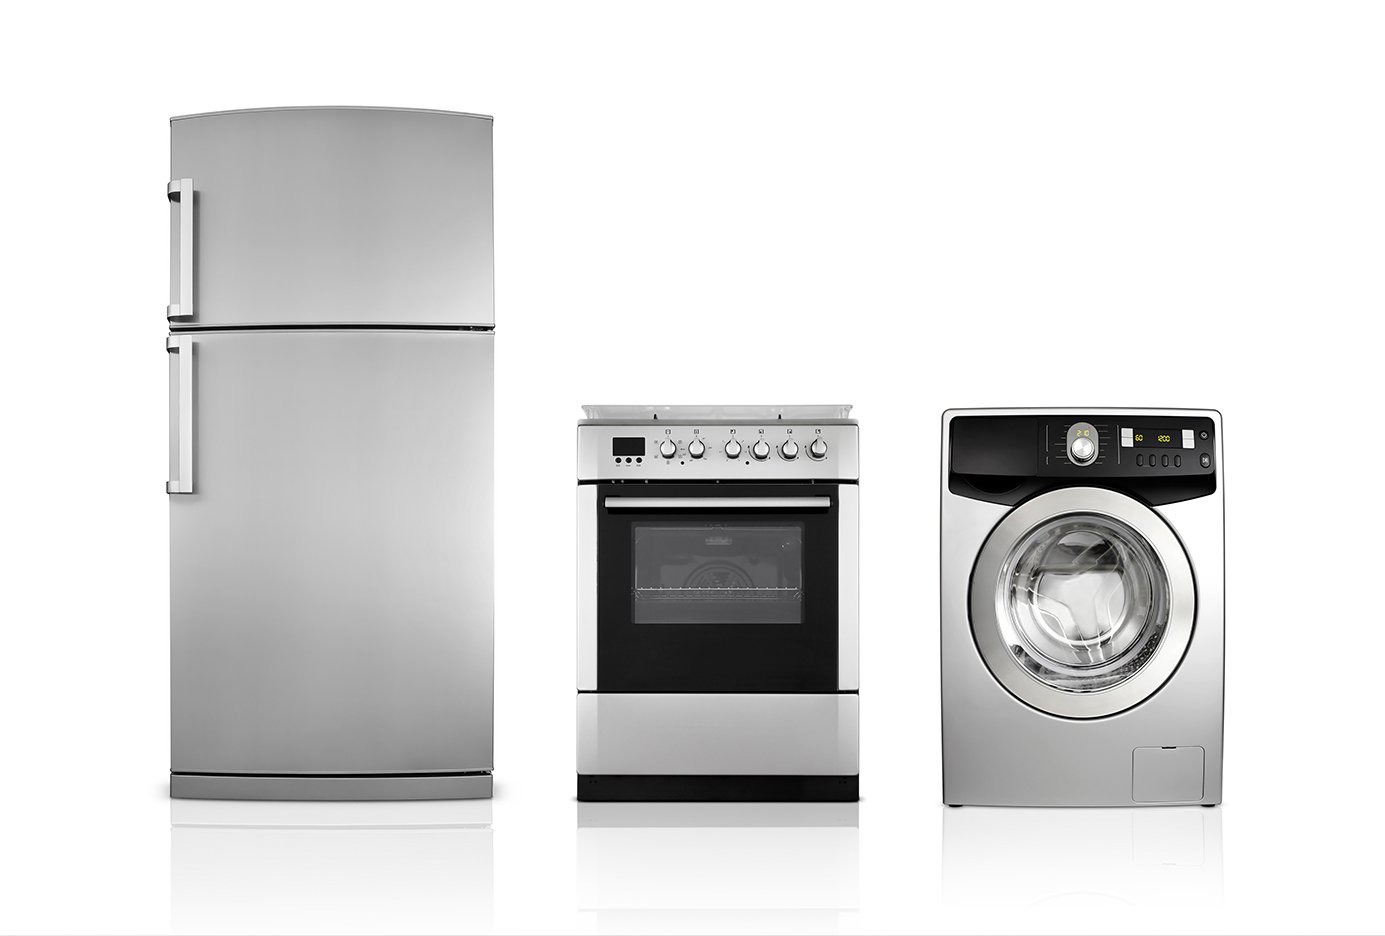 A kitchen refrigerator, an oven, and a washing machine.